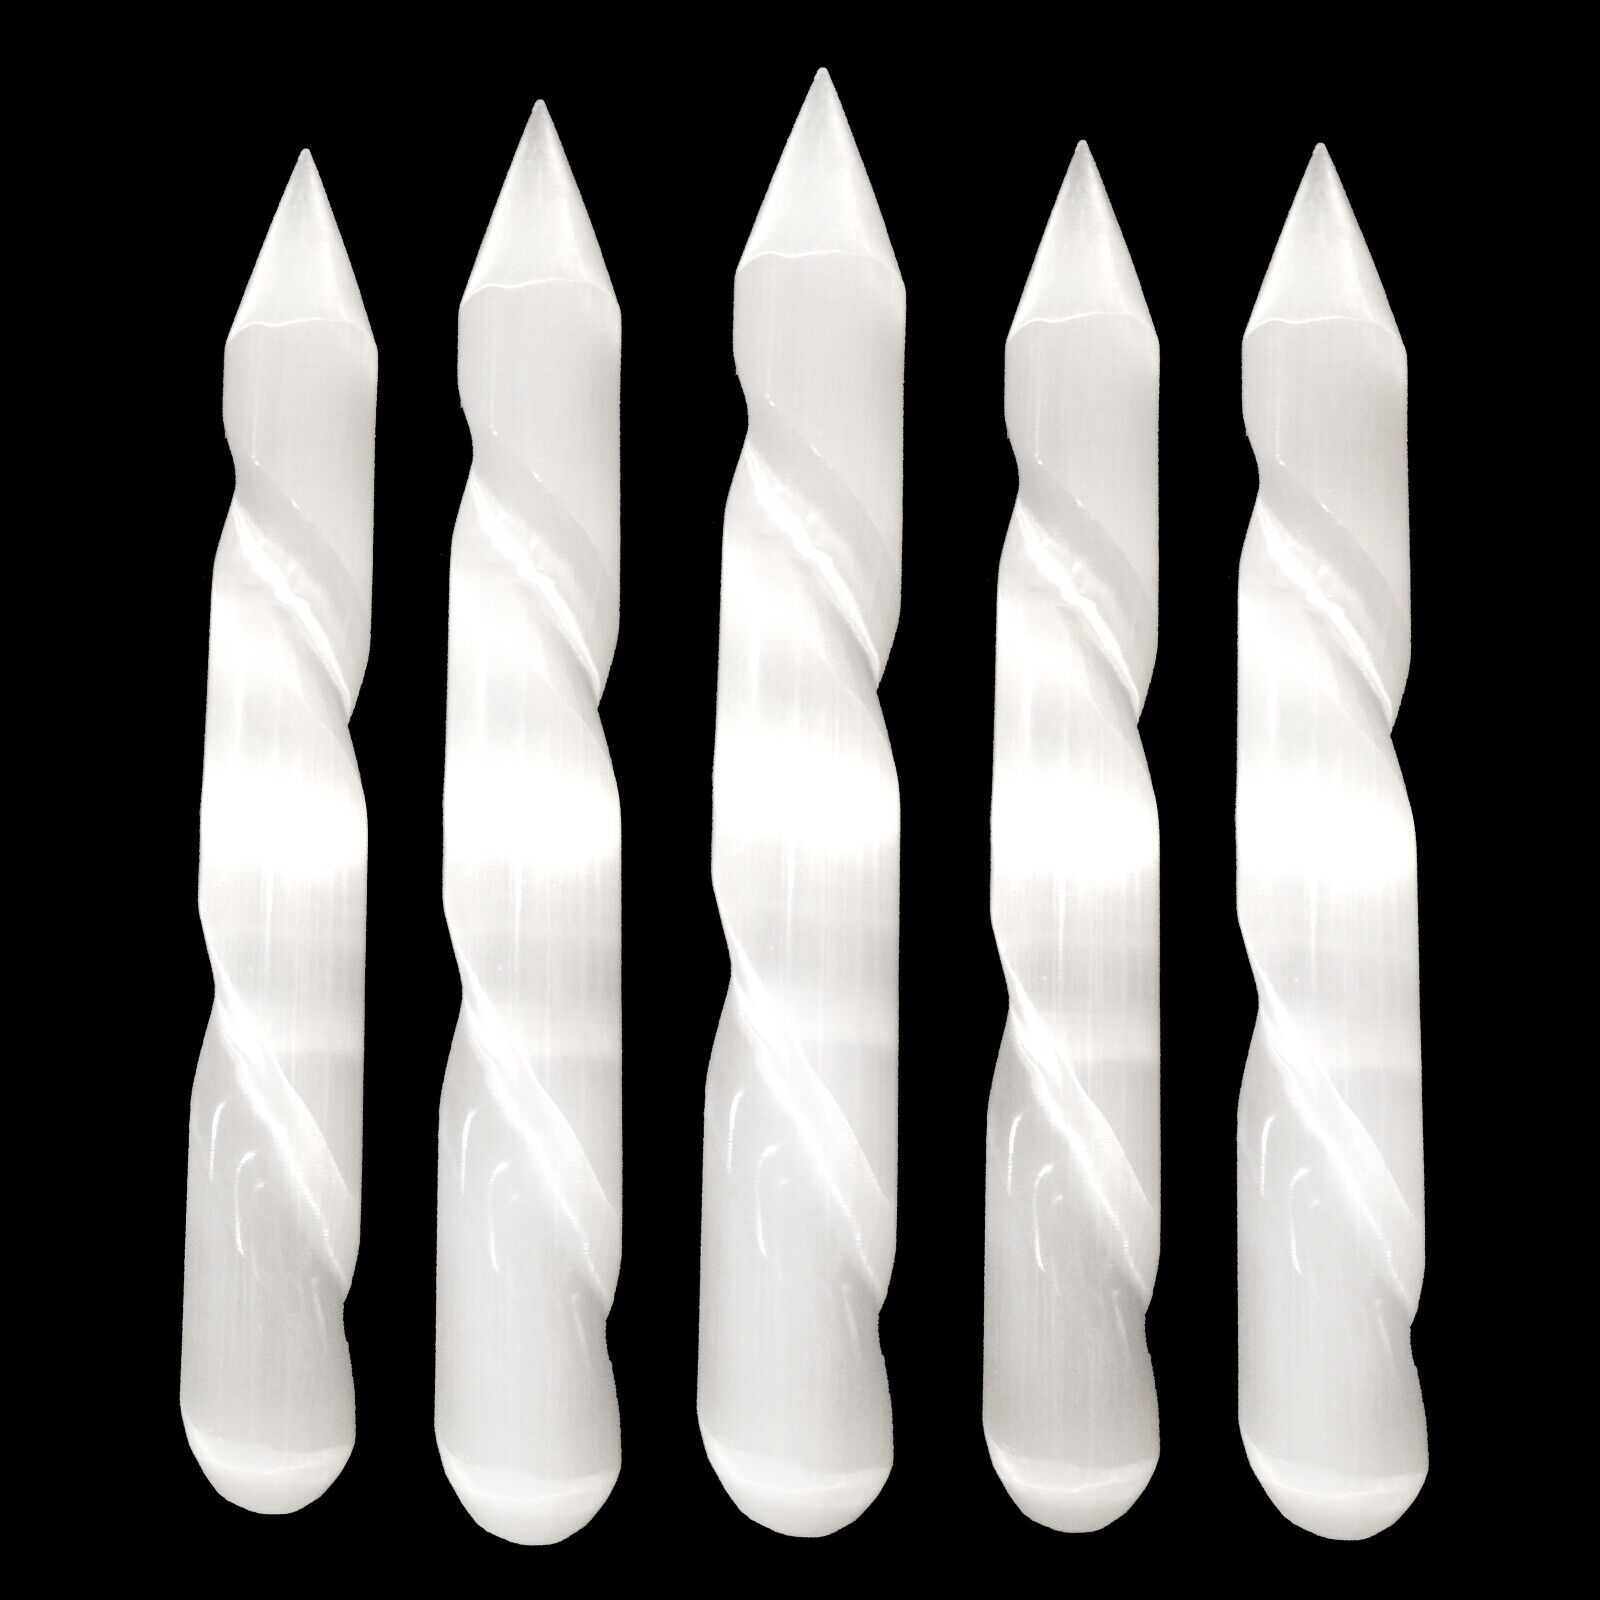 5x Selenite Crystal Massage Wand Smooth Polished Round Point Tip Reiki Energy